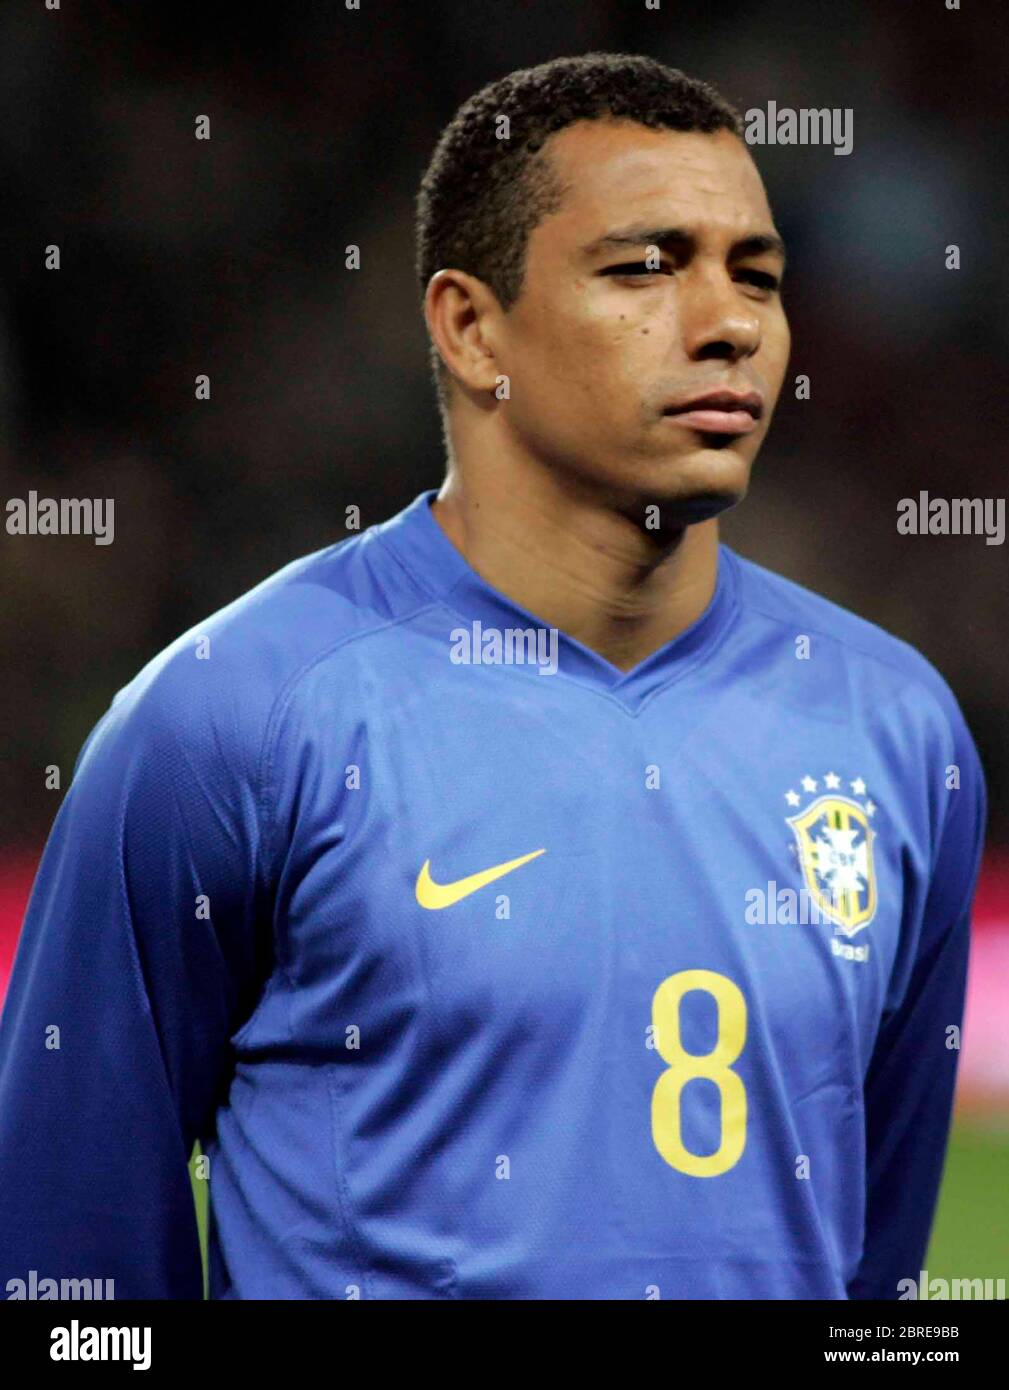 LONDON, UK MARCH 26: Gilberto Silva playing for Brazil at his home ground (Arsenal) during International Friendly between Brazil and Sweden at Emirate Stock Photo